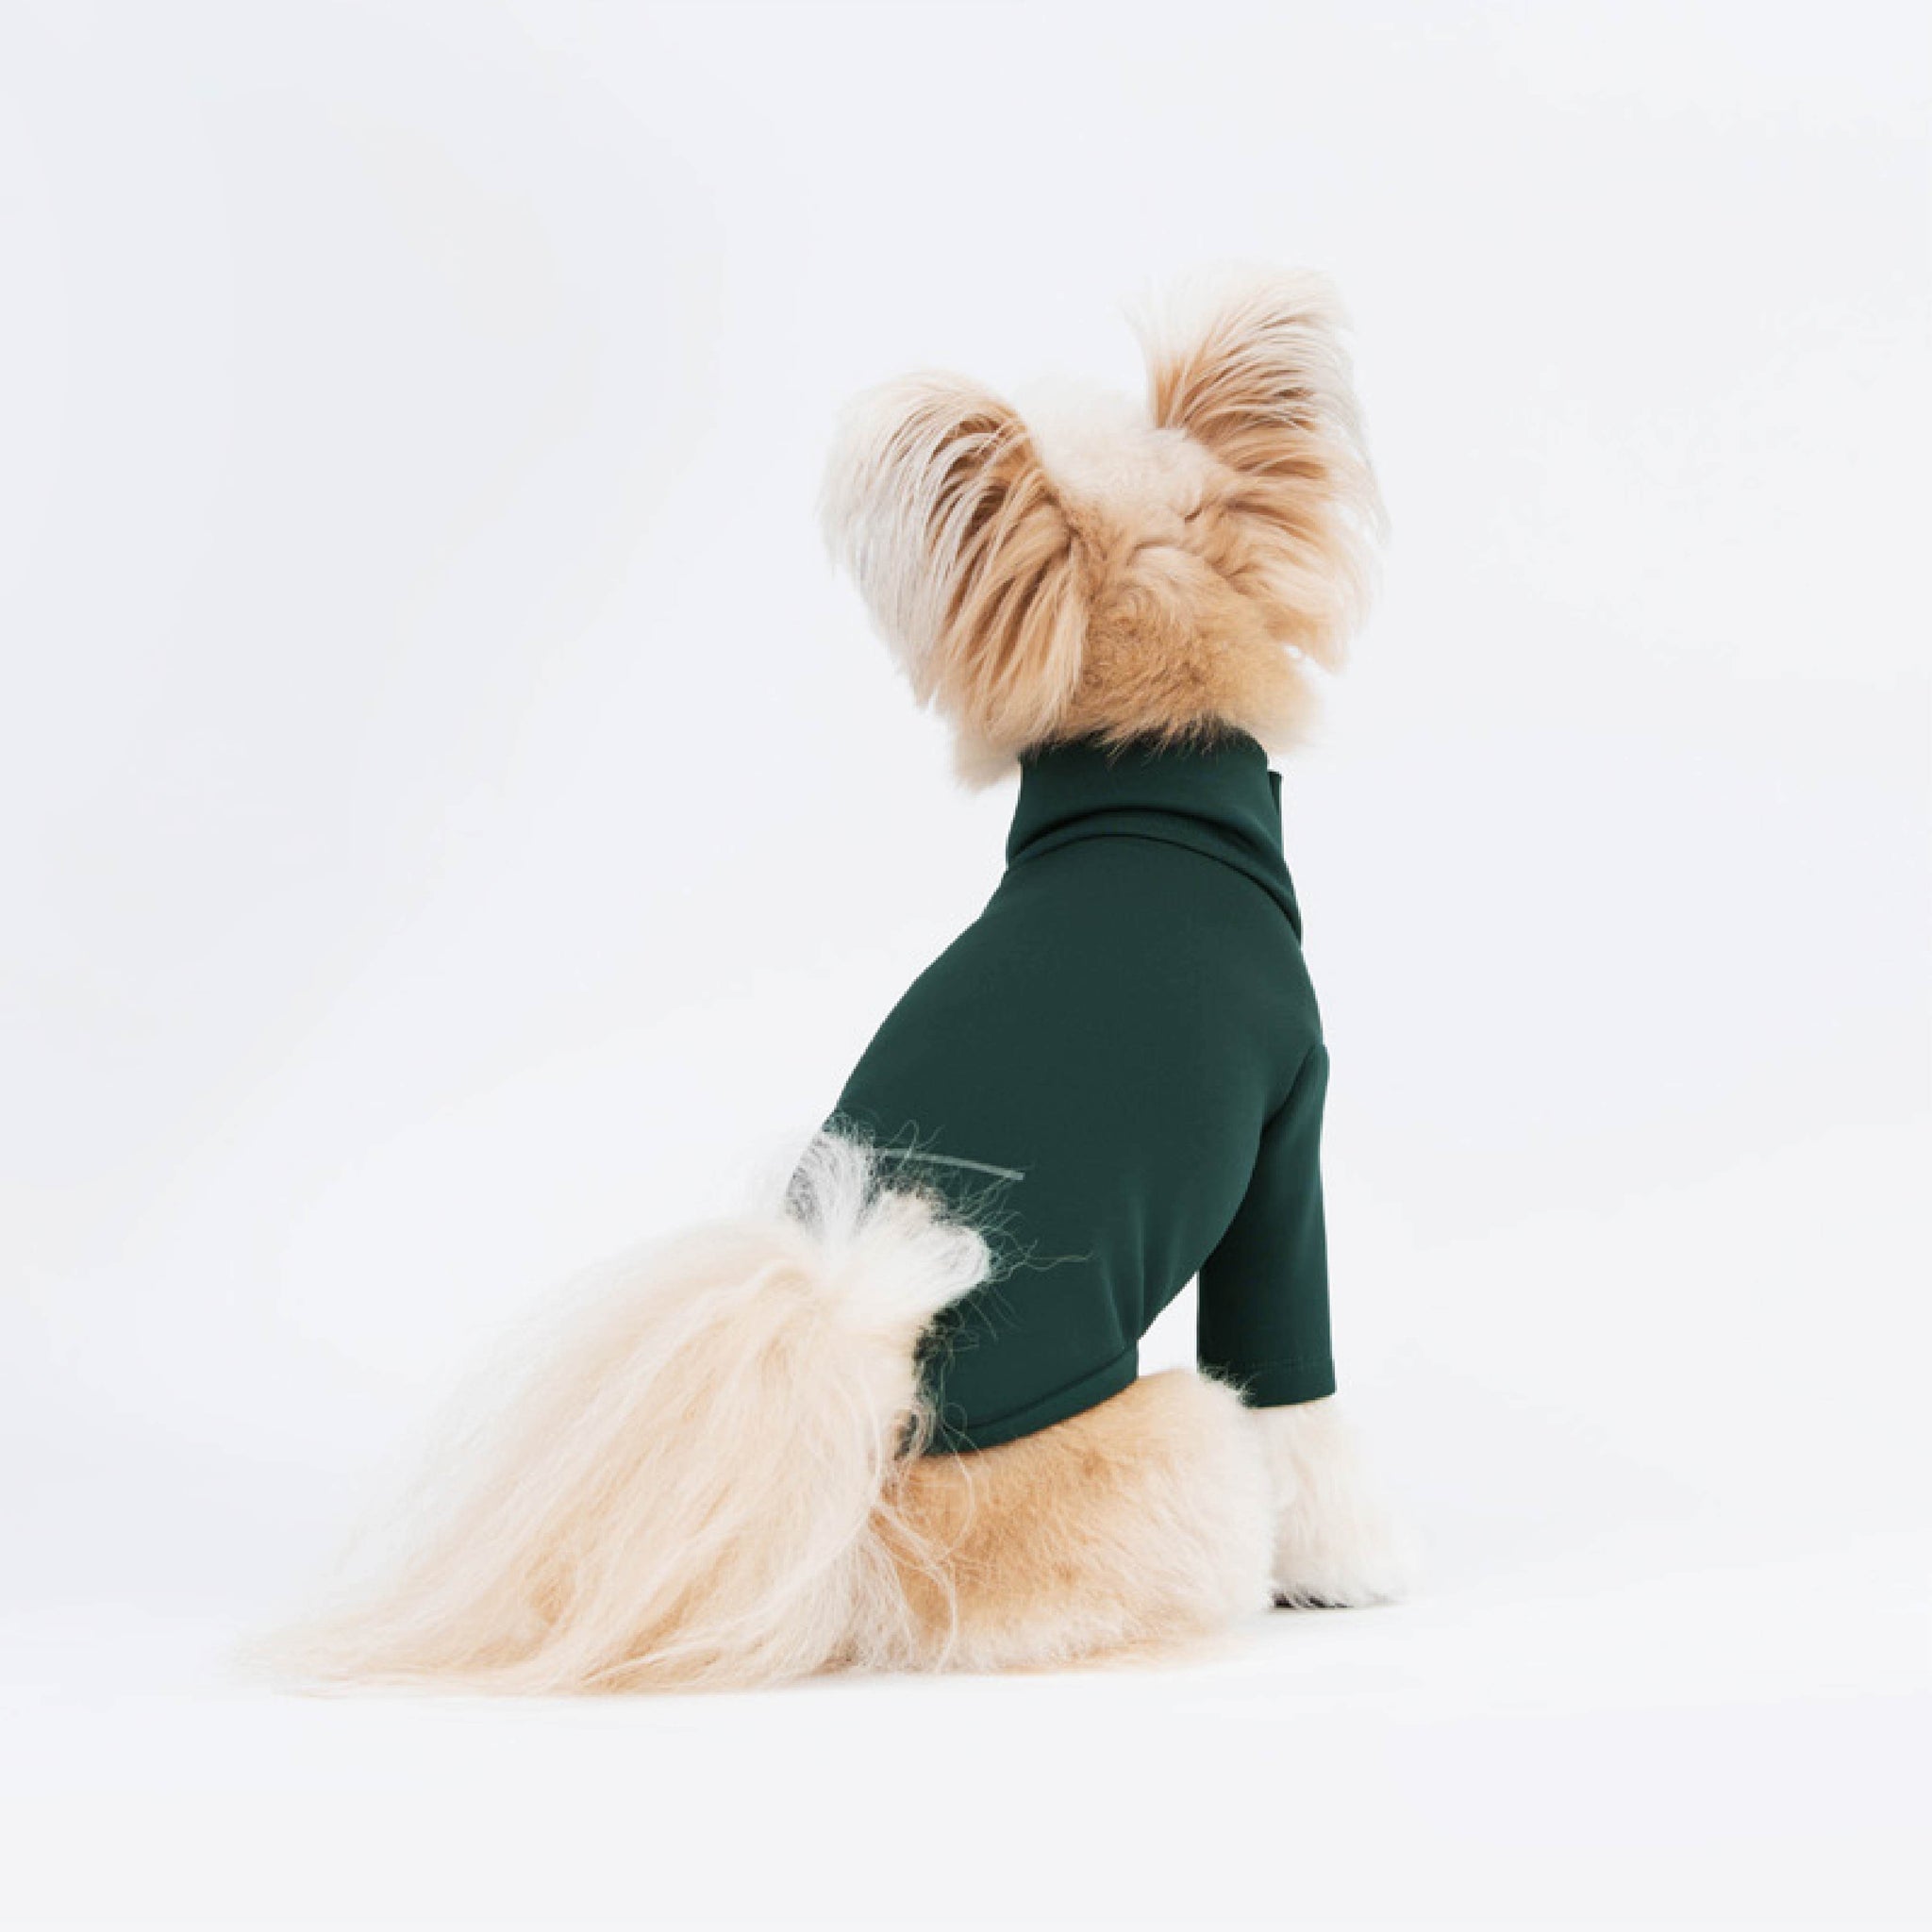 Turtleneck t-shirt made of neoprene material in deep green. Model is wearing a M & weighs 7 pounds (3.2 kg).